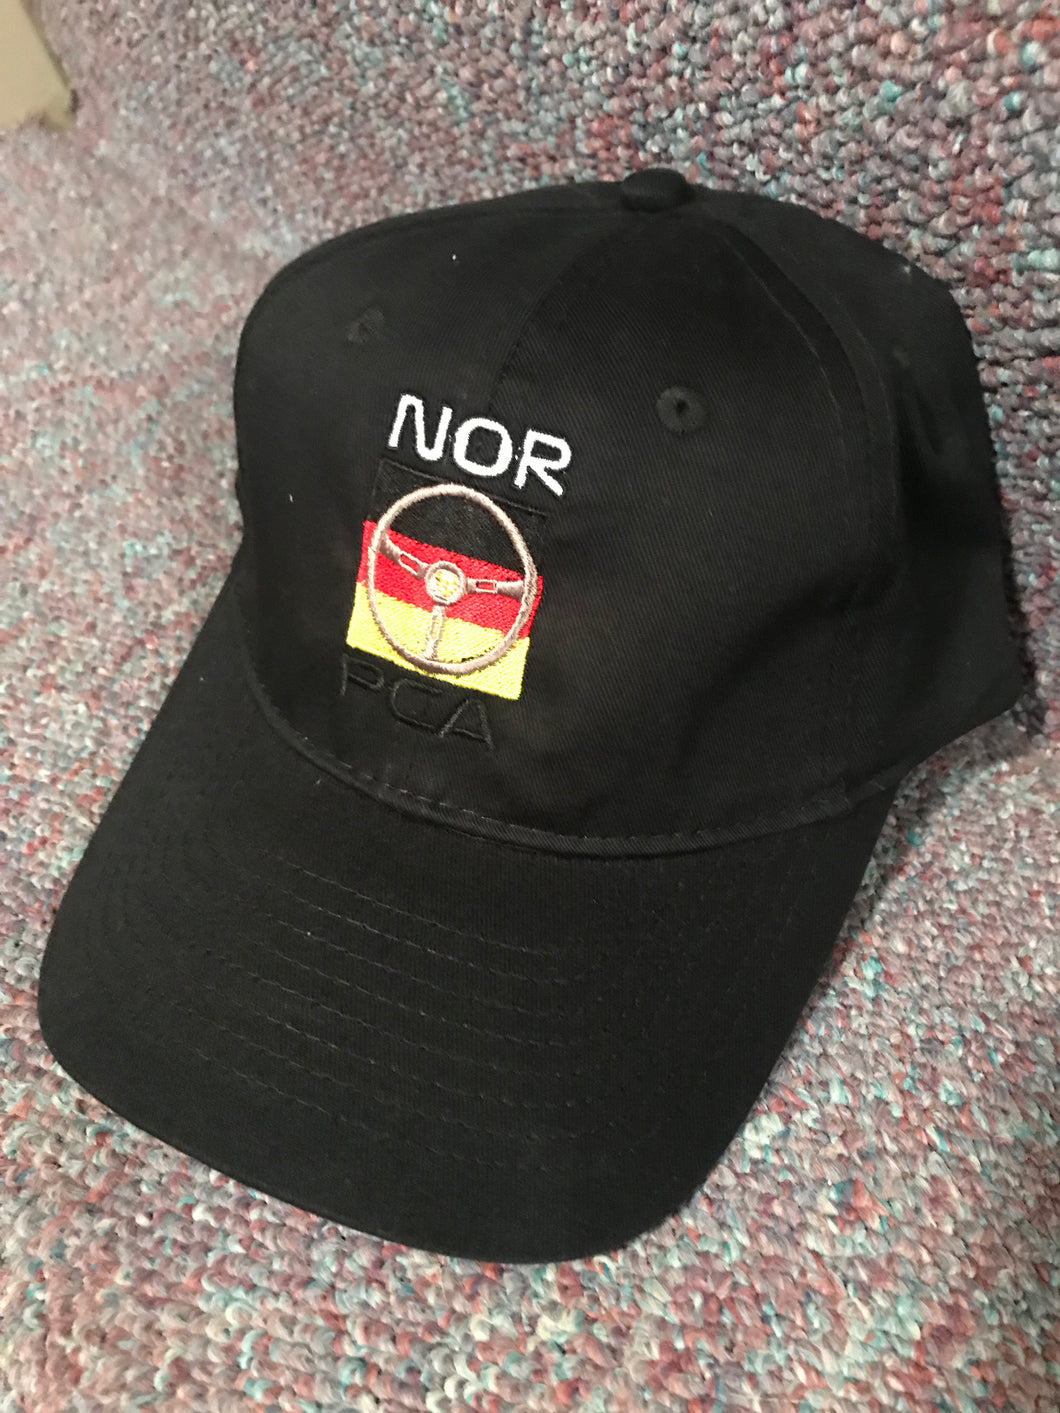 BASEBALL CAP with NORPCA LOGO EMBROIDERED on front.